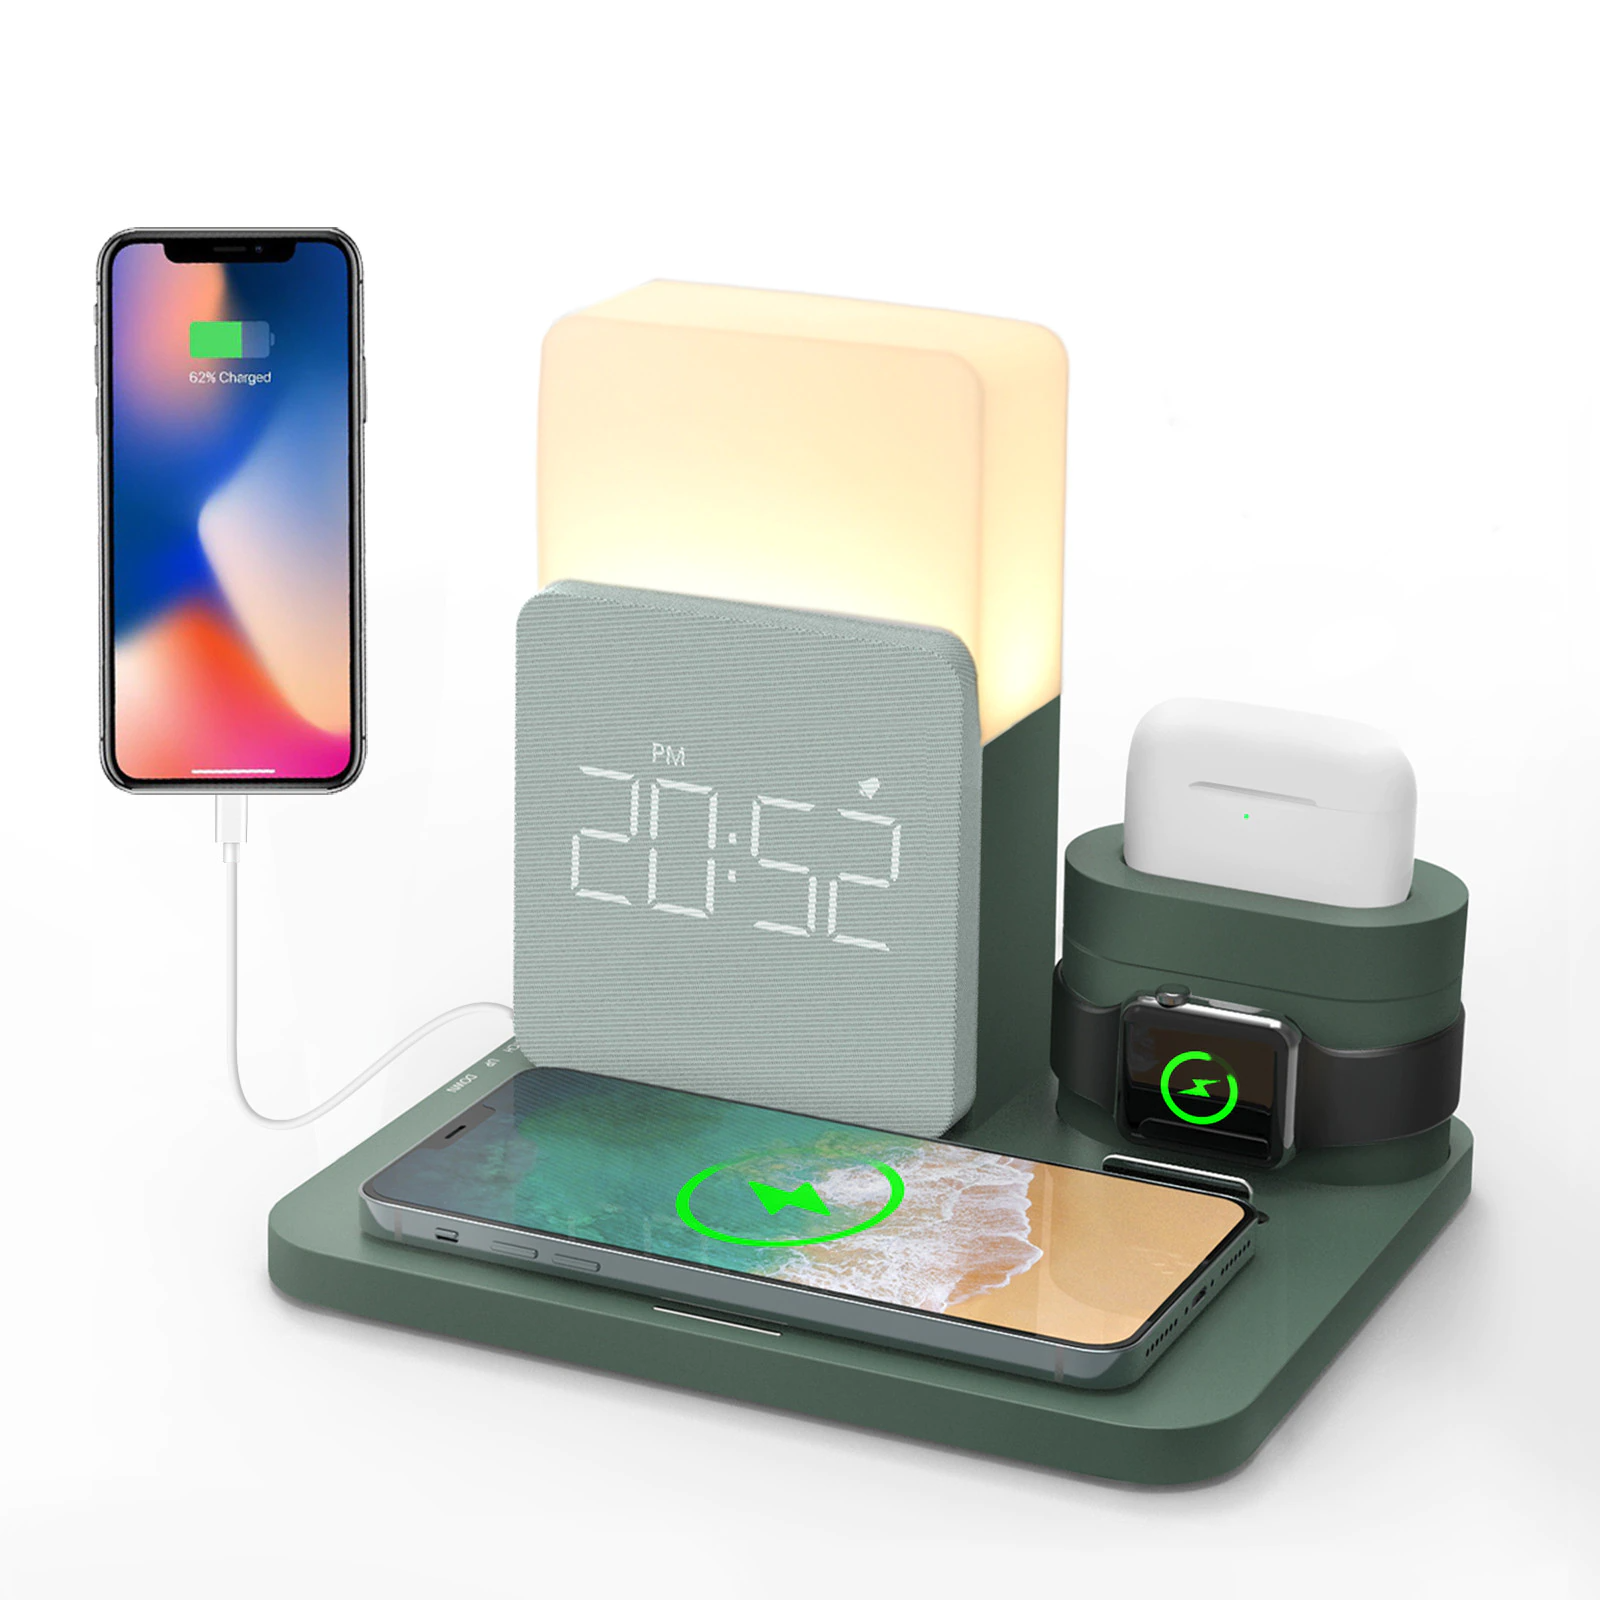 Alarm Clock With Wireless Charging: